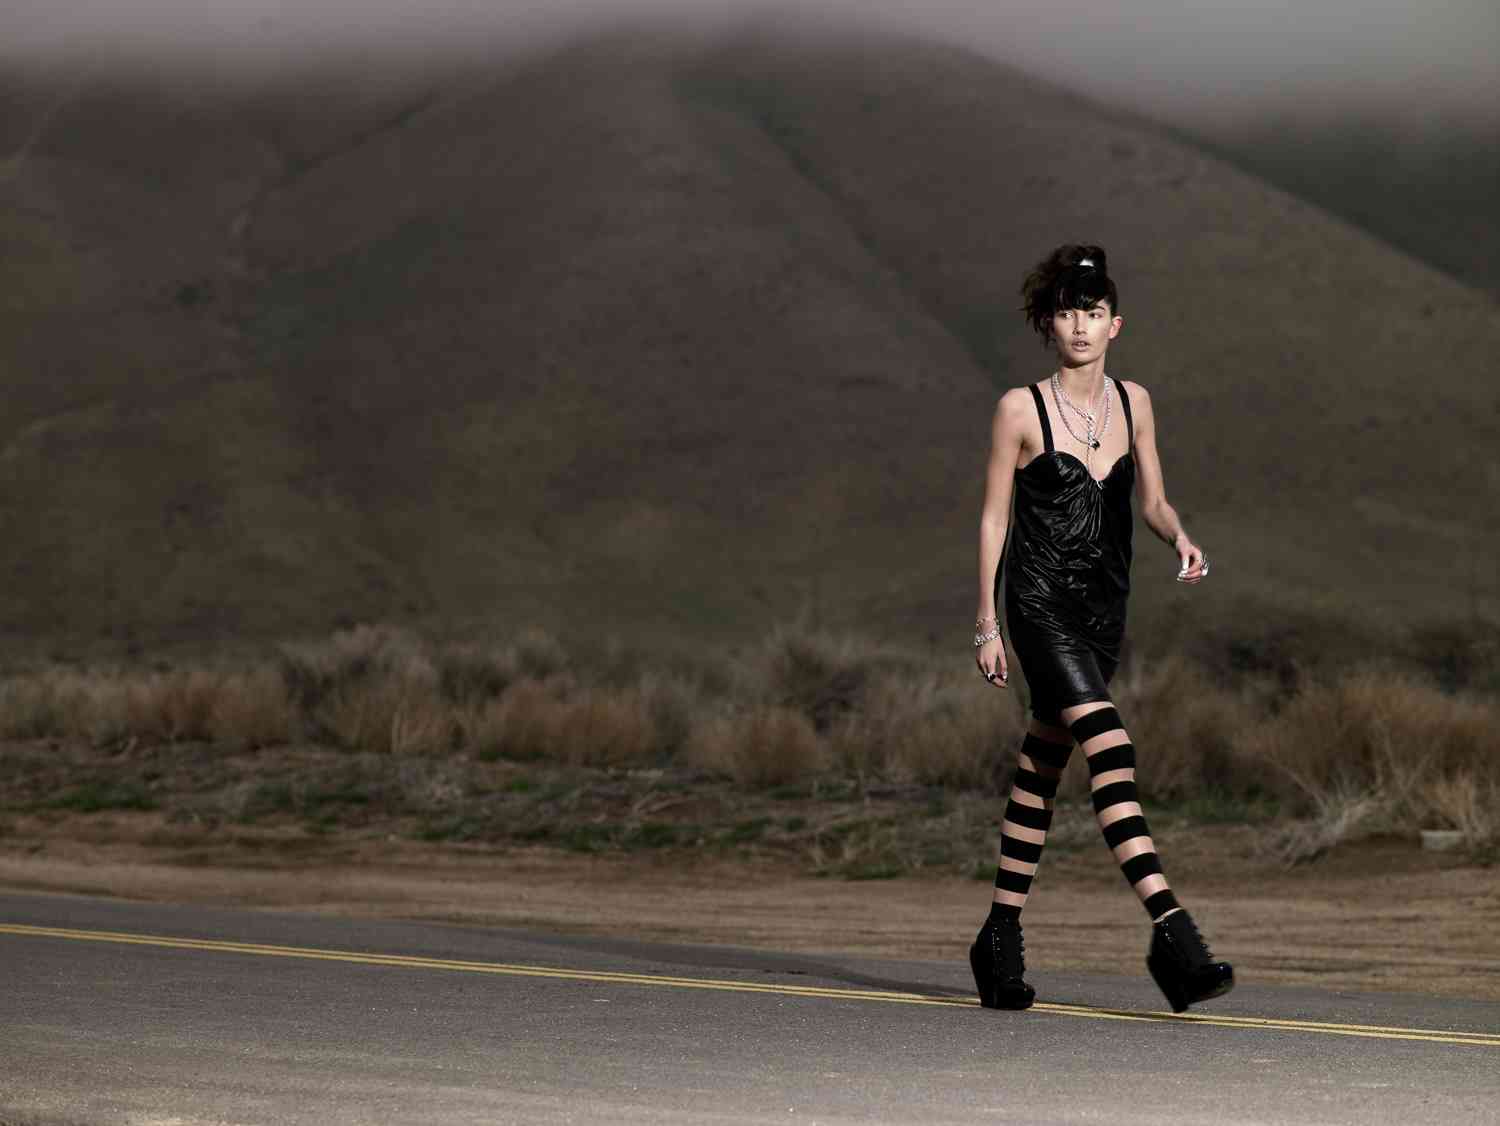 conic Editorial Images of Mojave Desert California 92332, a photo taken by Warwick Saint.